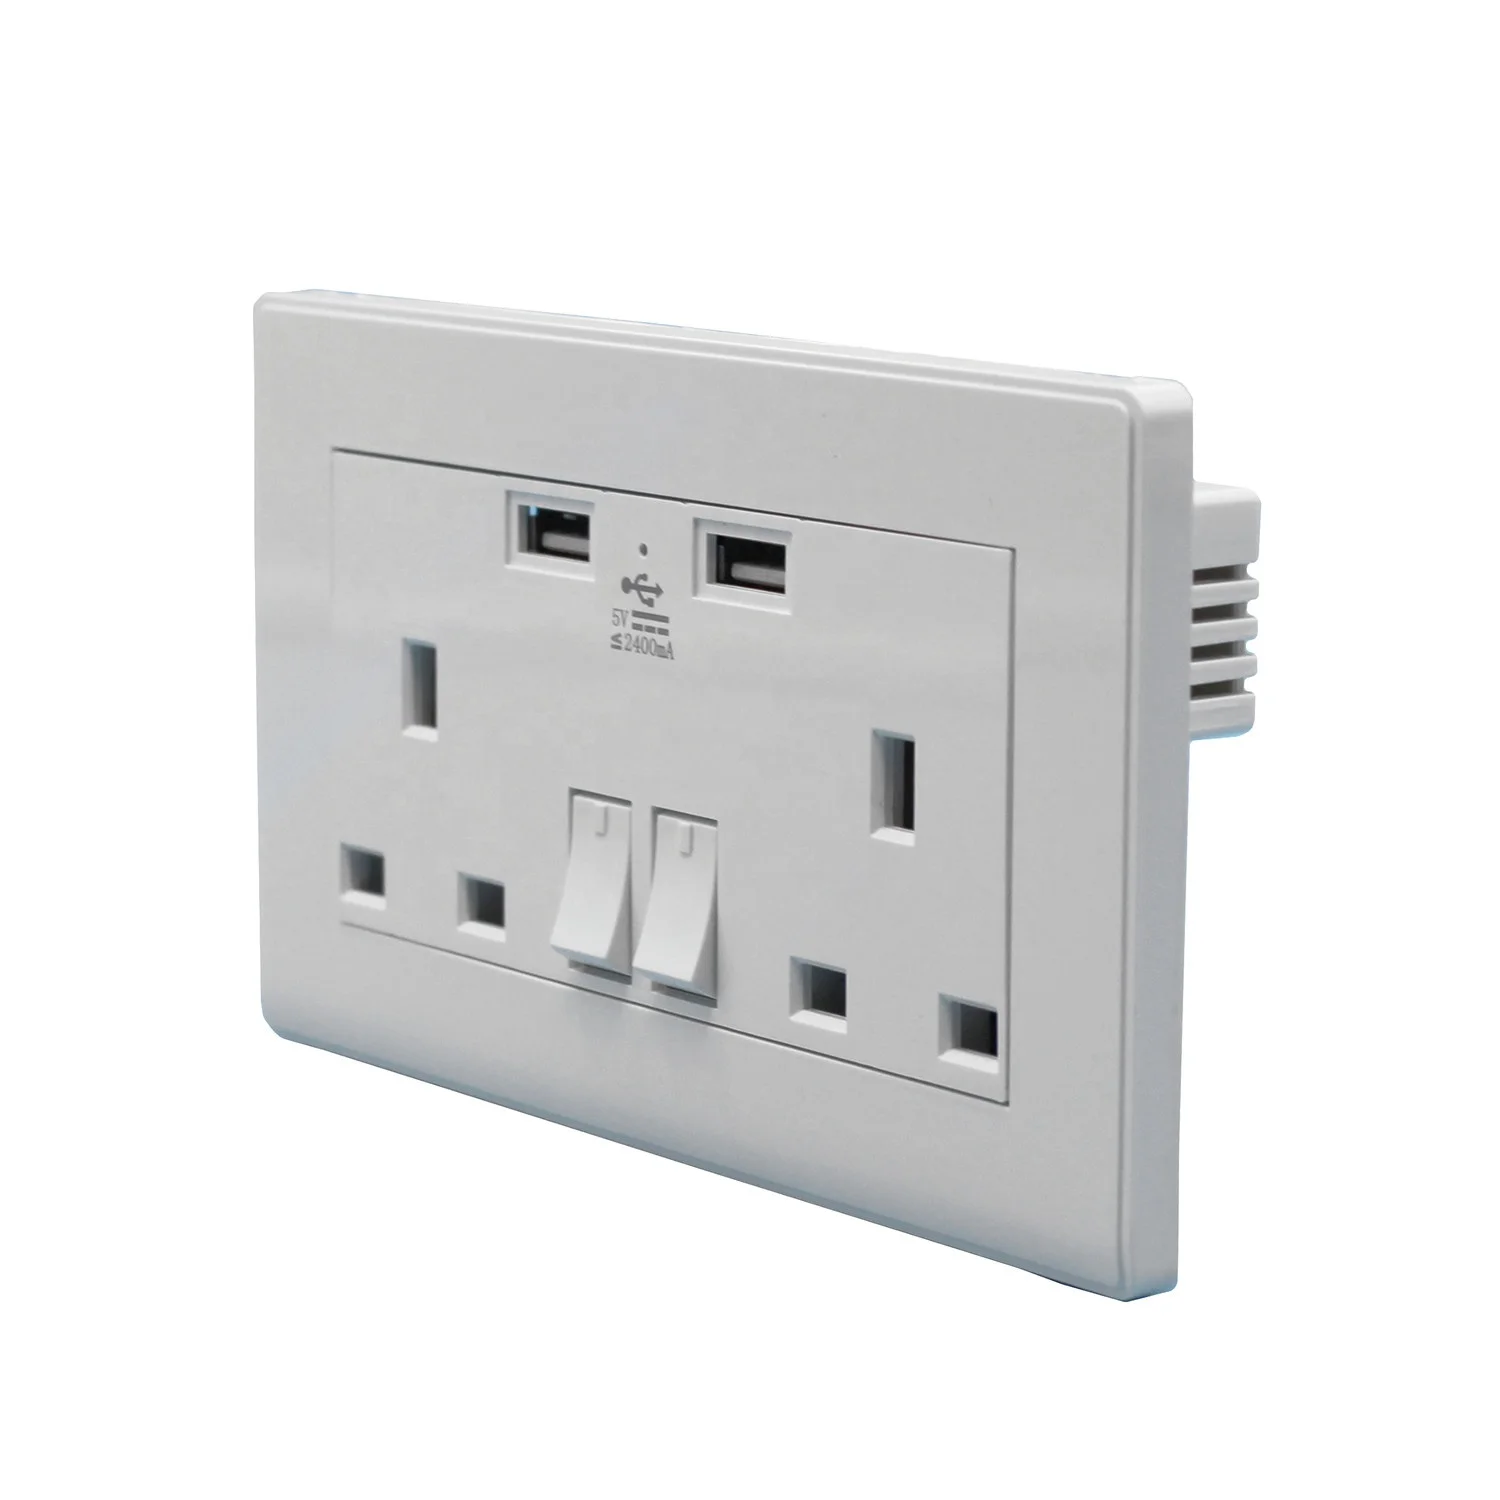 Double Wall Socket With 2 USB Twin fast Charger Plug Switched Ports 2 Gang